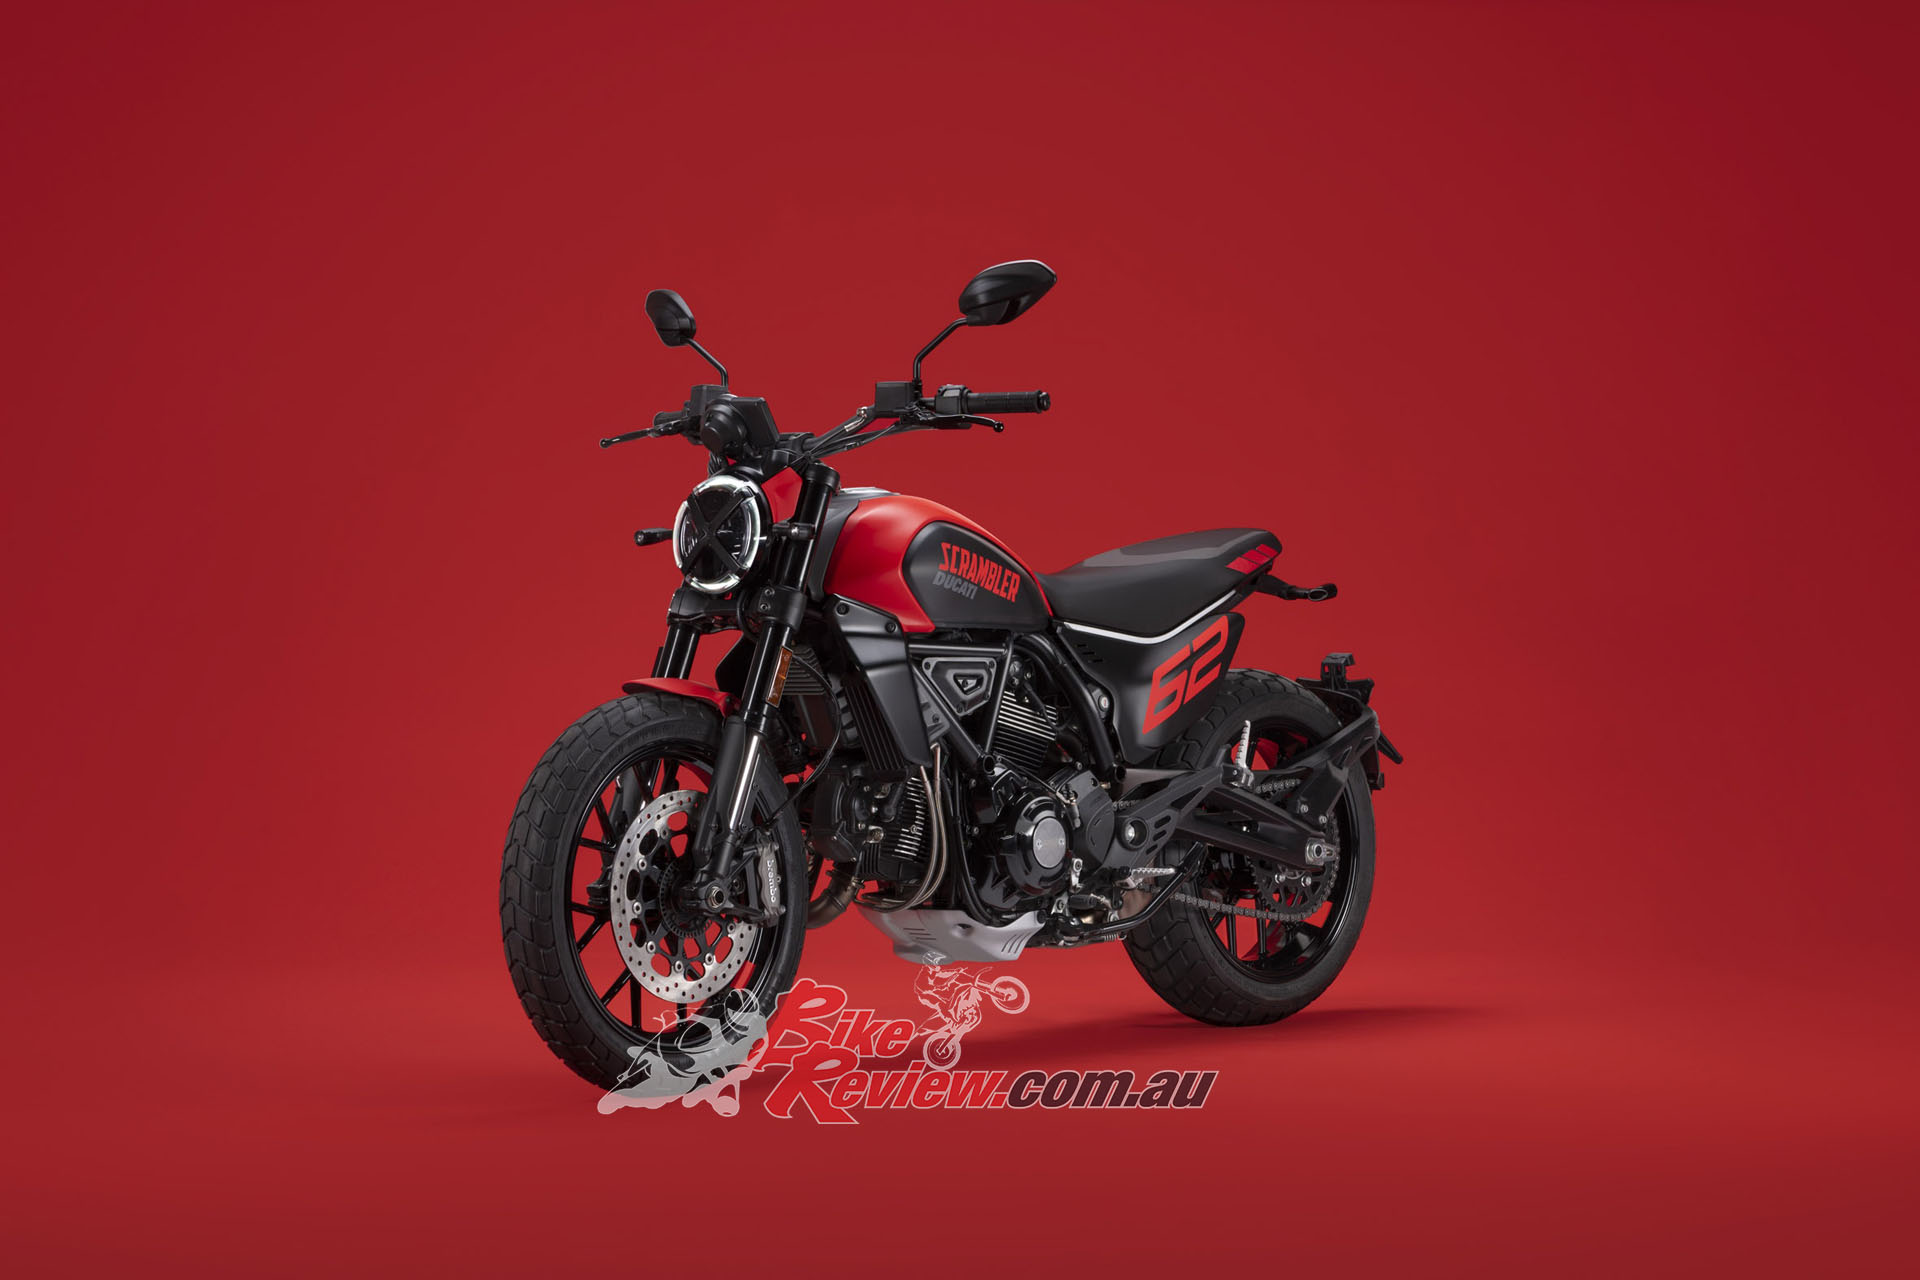 The Ducati Scrambler Full Throttle is the sportiest proposal in the 2023 range and is inspired by U.S. flat track competitions.